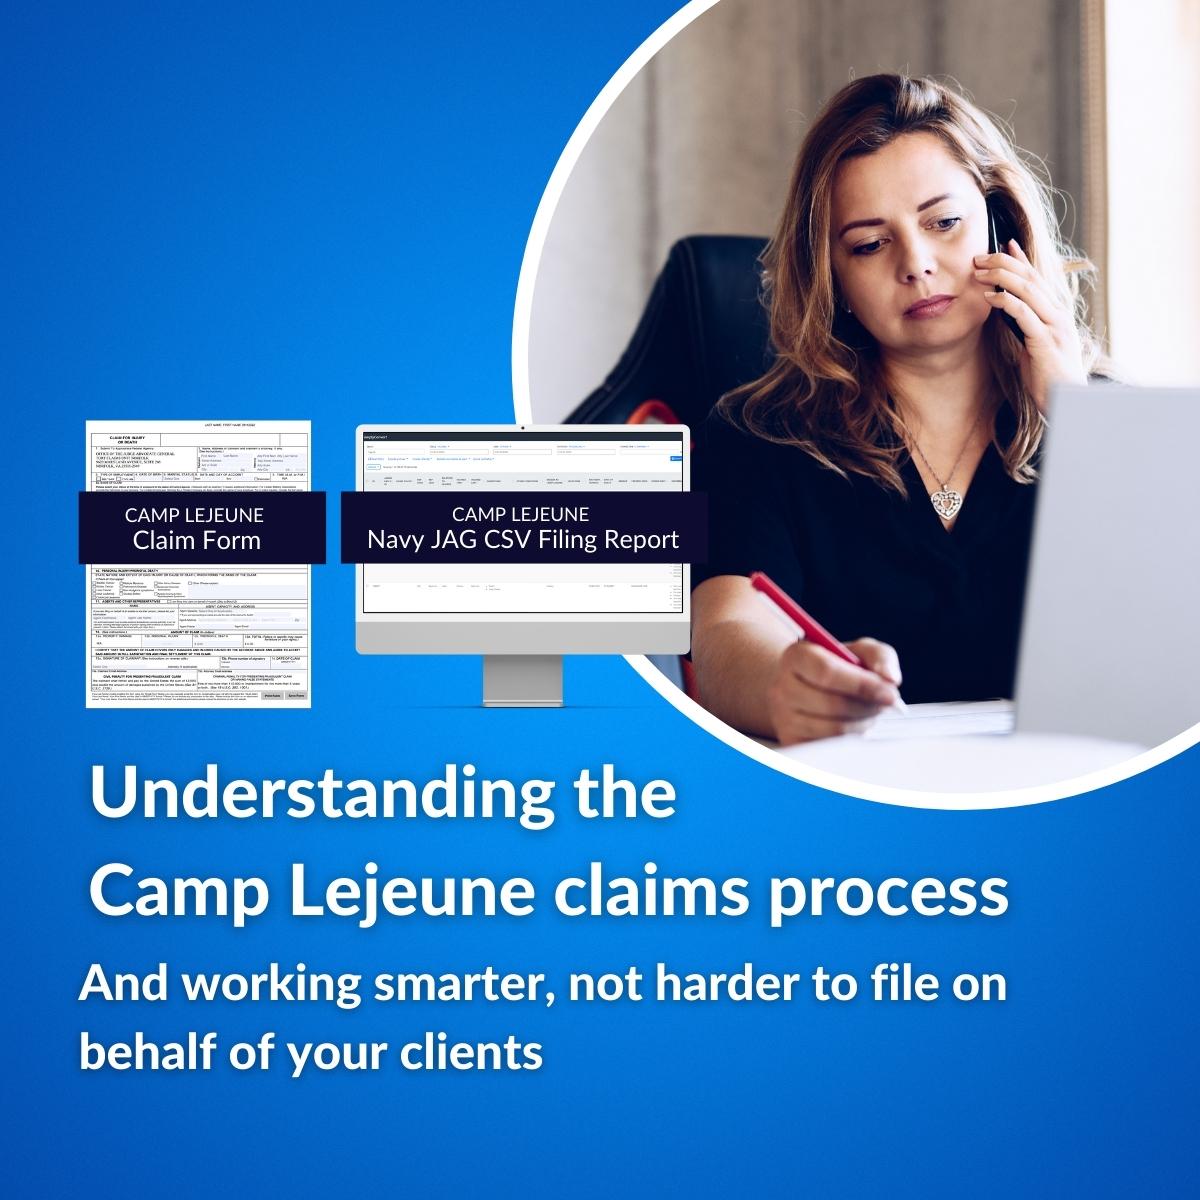 What lawyers need to know about the Camp Lejeune claim filing process